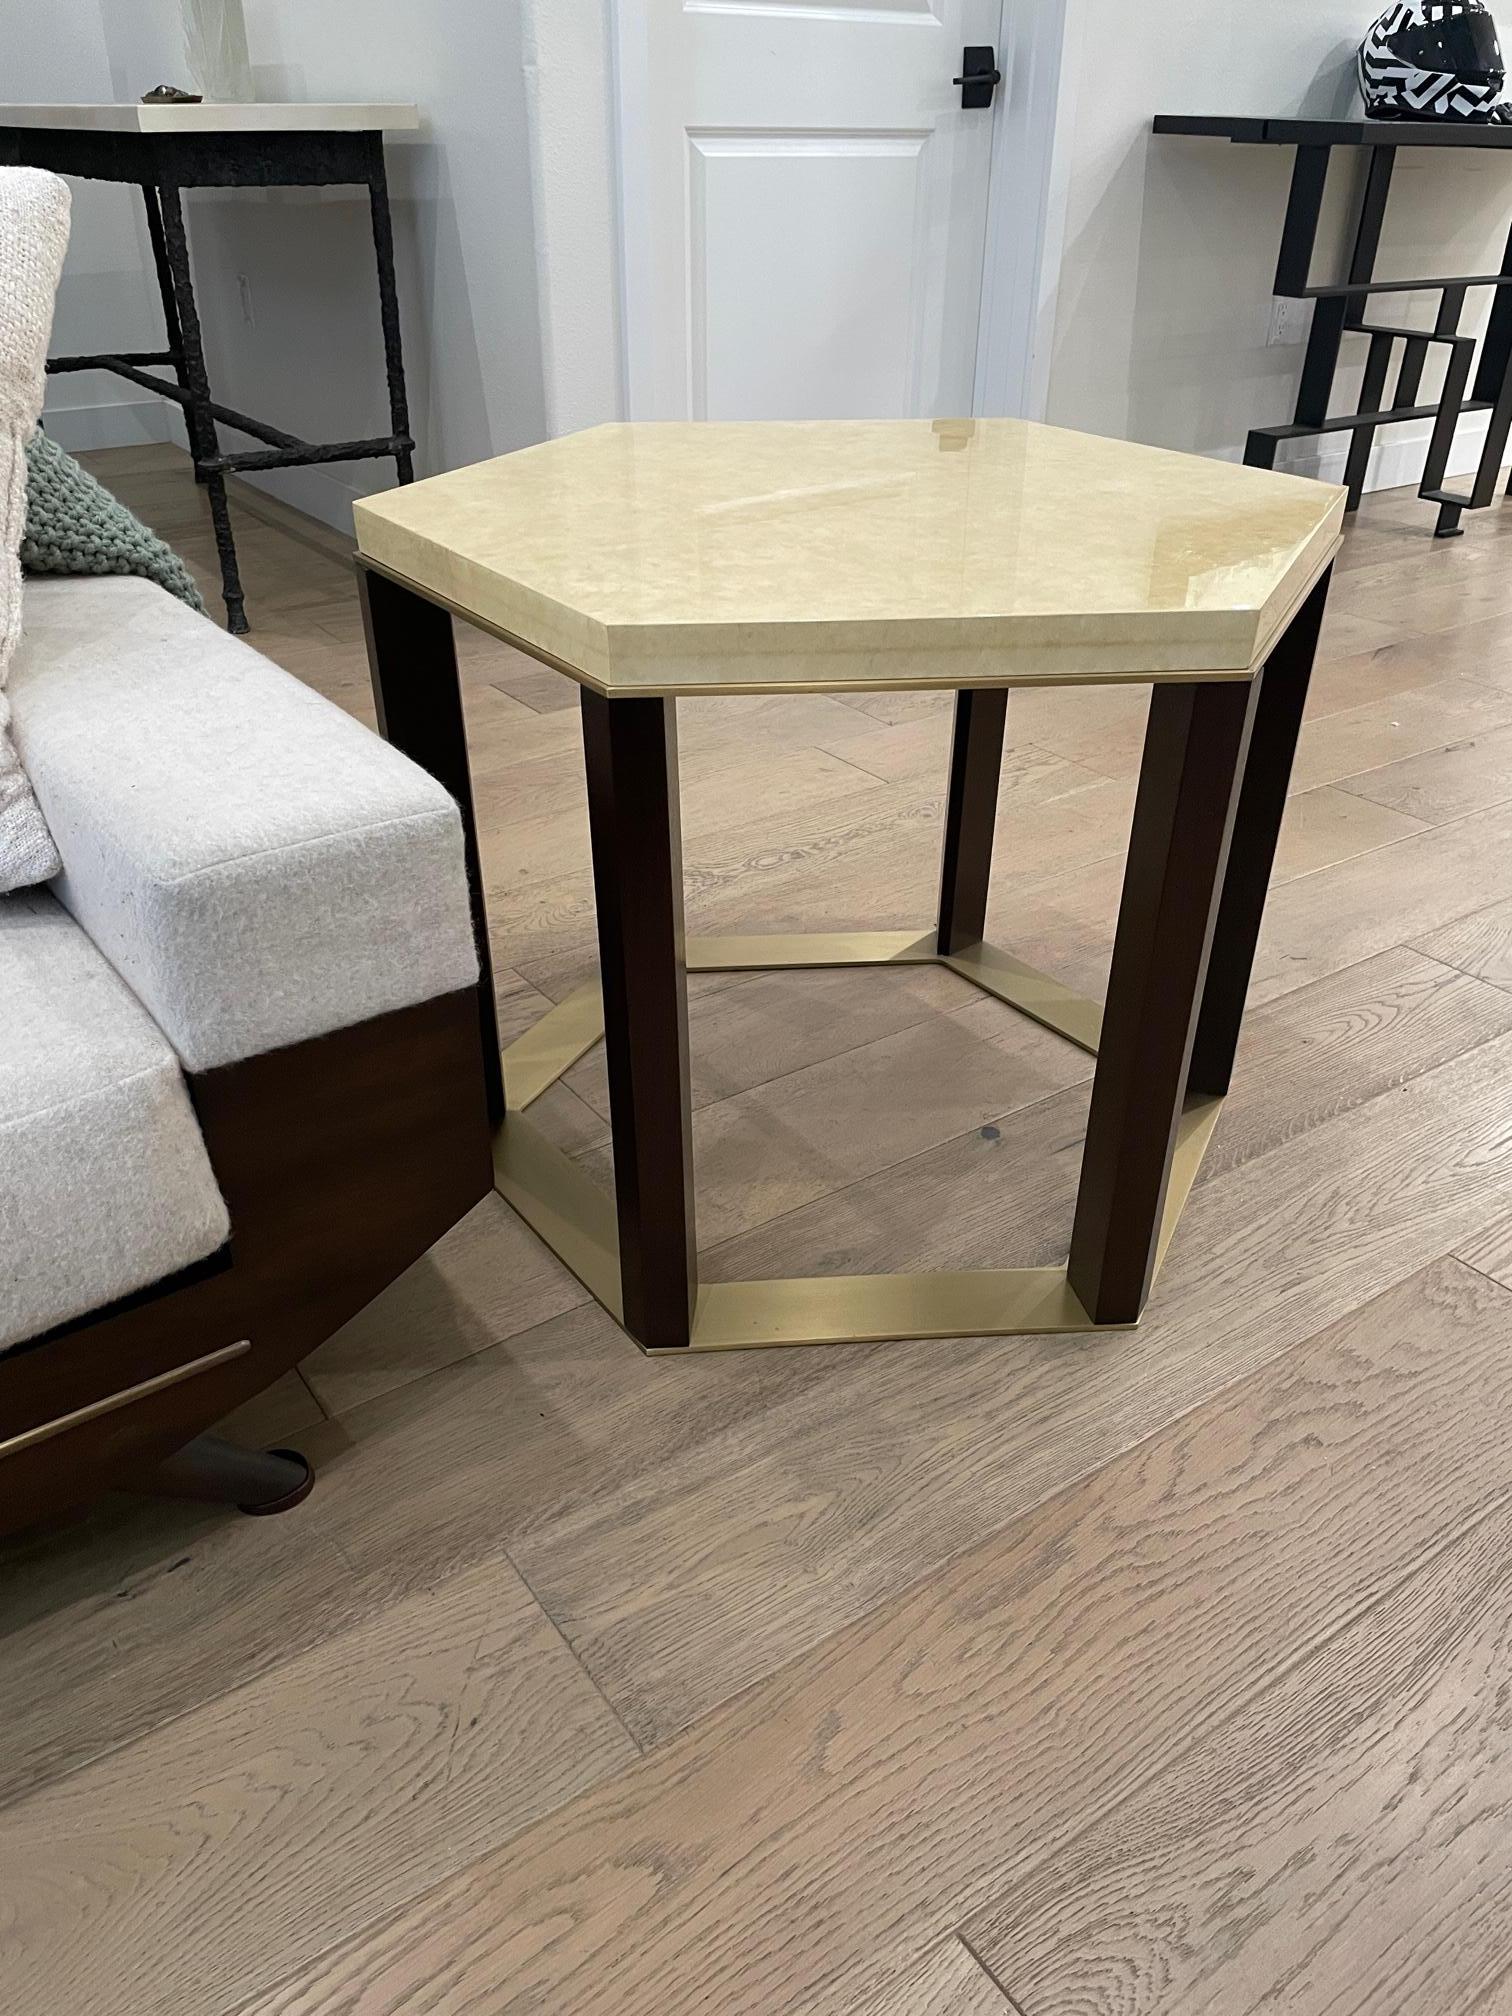 Jean de Merry's Uros side table works elegantly as a traditional side table, corner table, or accent table.  The timeless mixture of Wood, Bronze, and Papyrus French Lacquer finish blend well with traditional and transitional decor.  The shape of